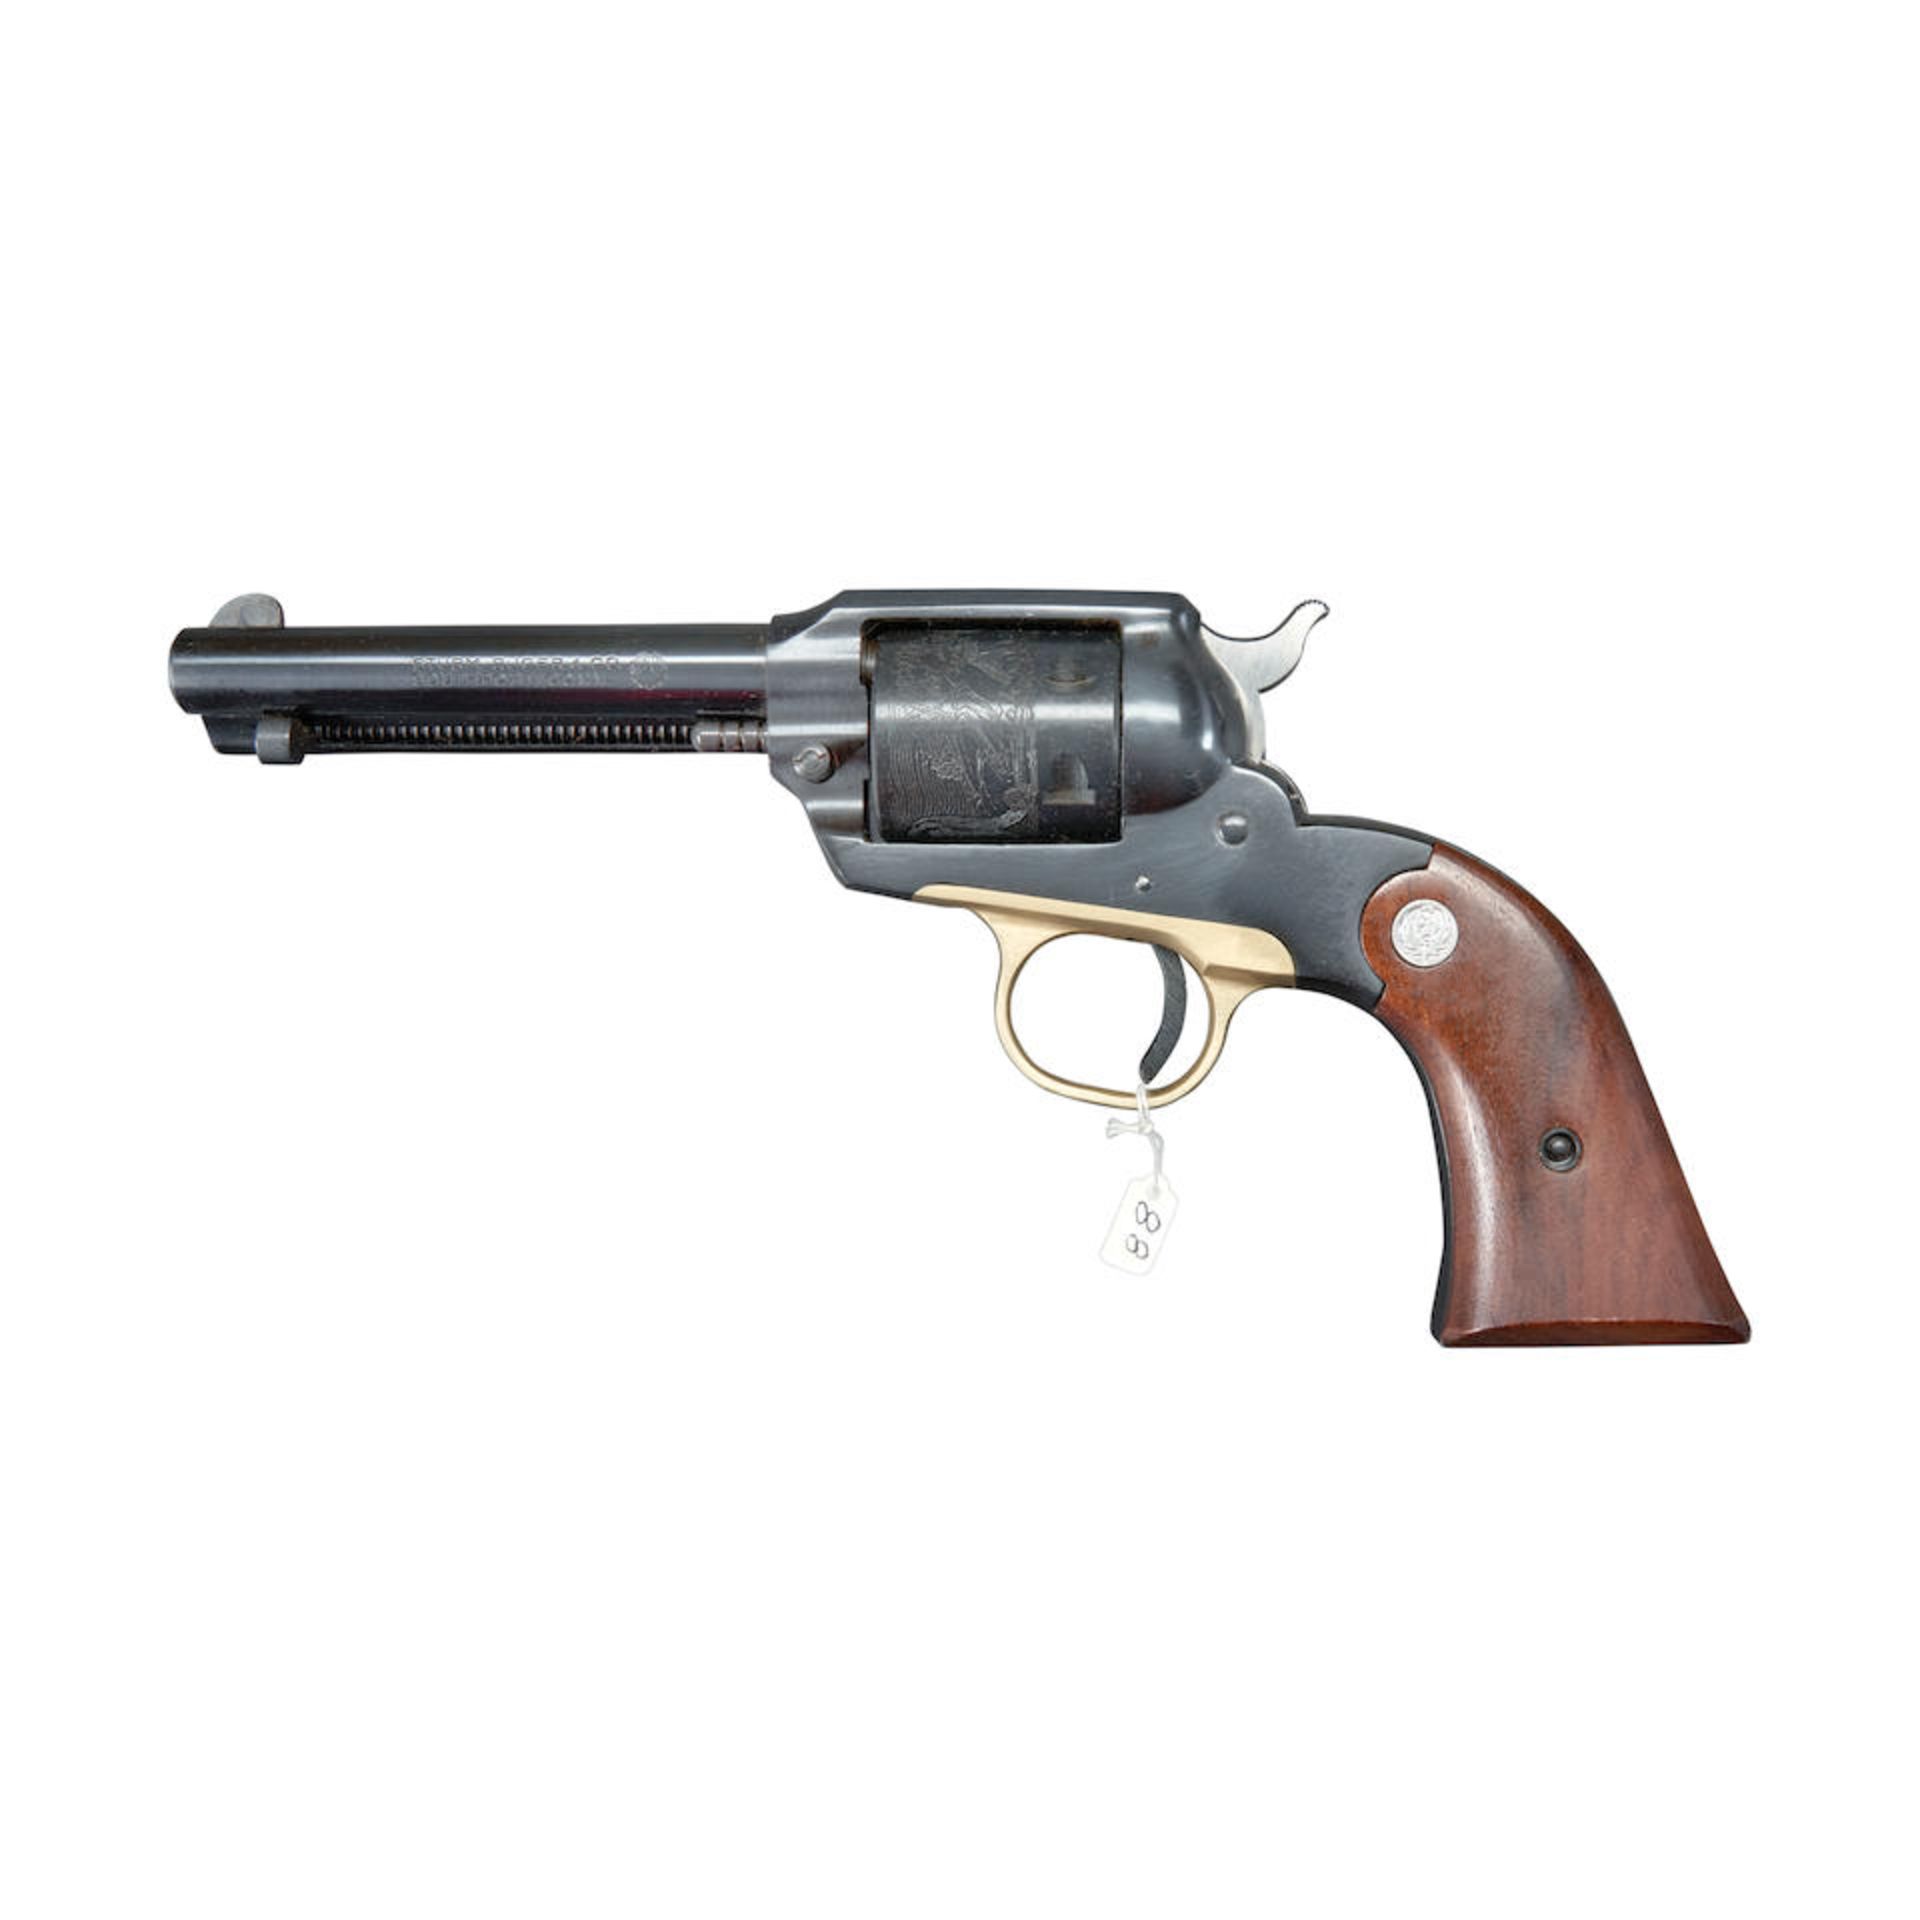 Ruger Super Bearcat Two-digit Serial Number Single Action Revolver, Curio or Relic firearm - Bild 4 aus 5